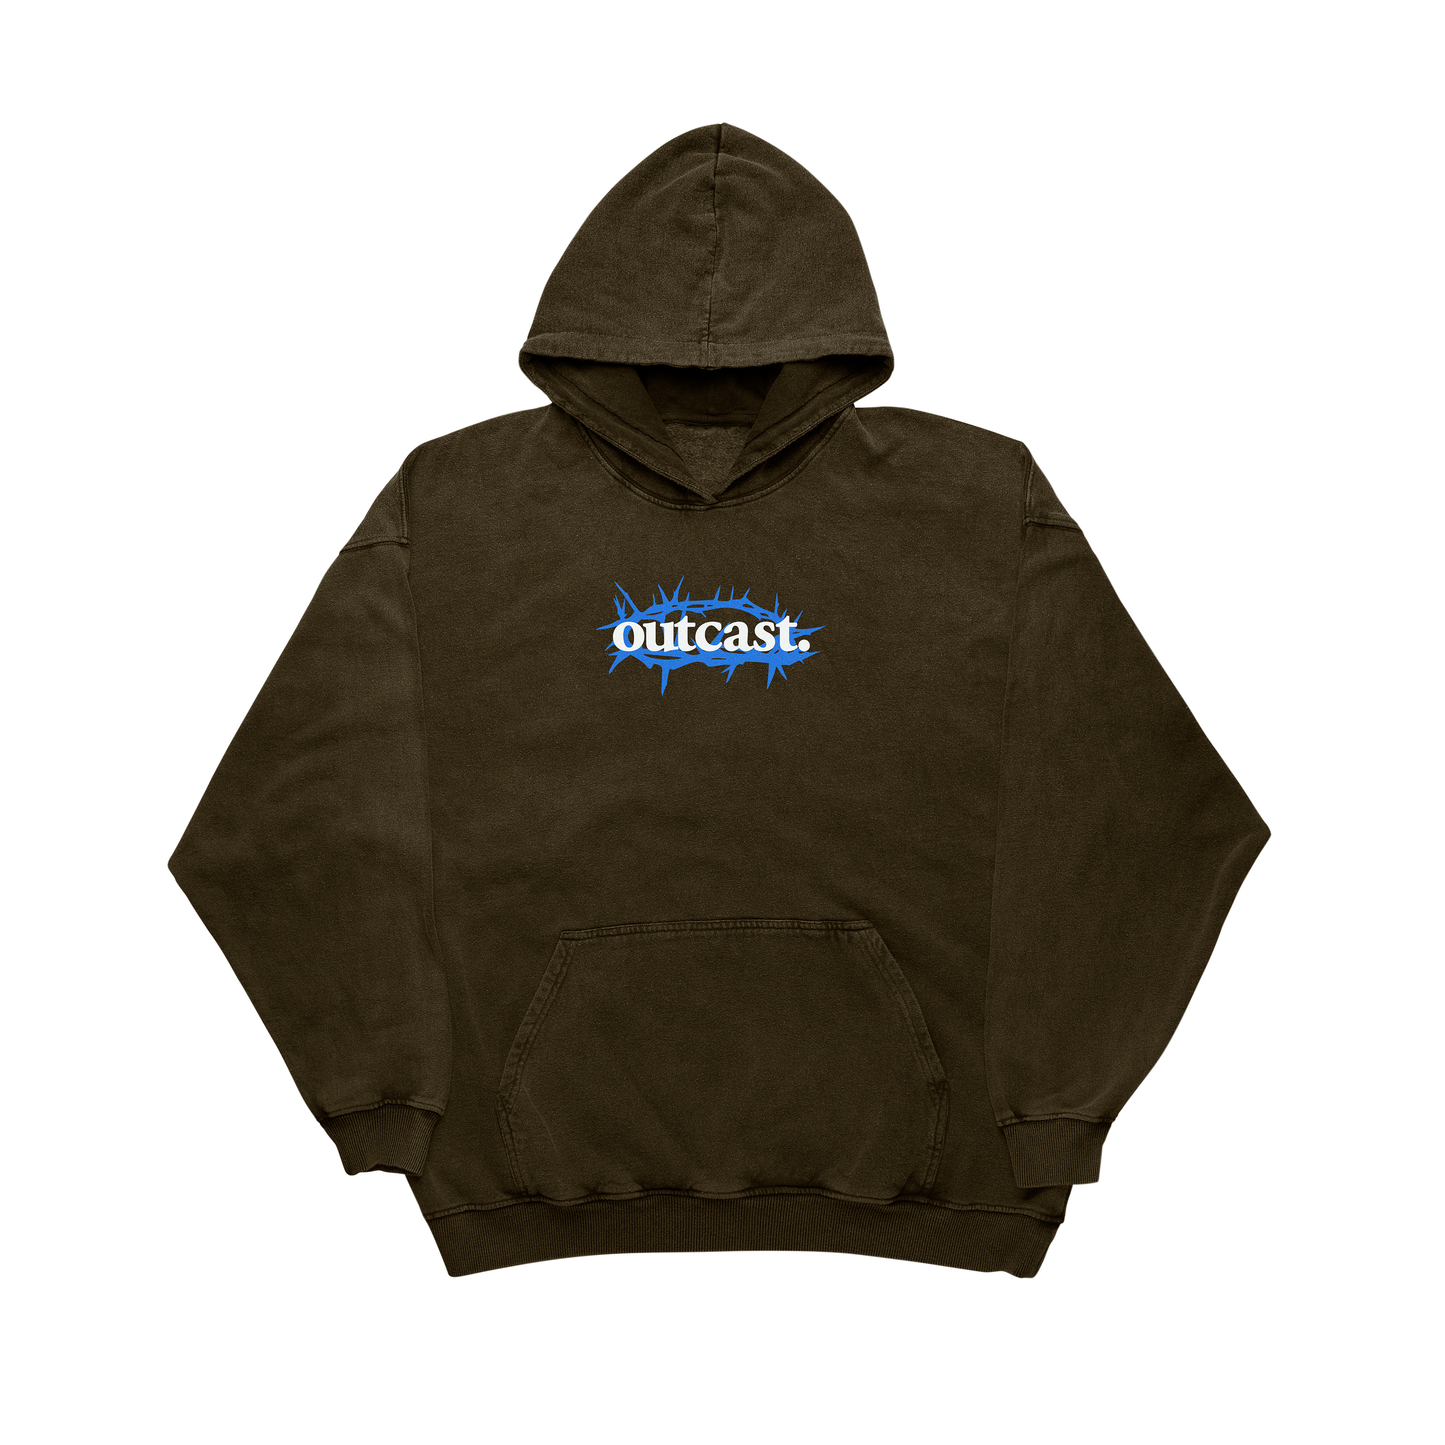 THE "CHILD OF GOD" BROWN HOODIE